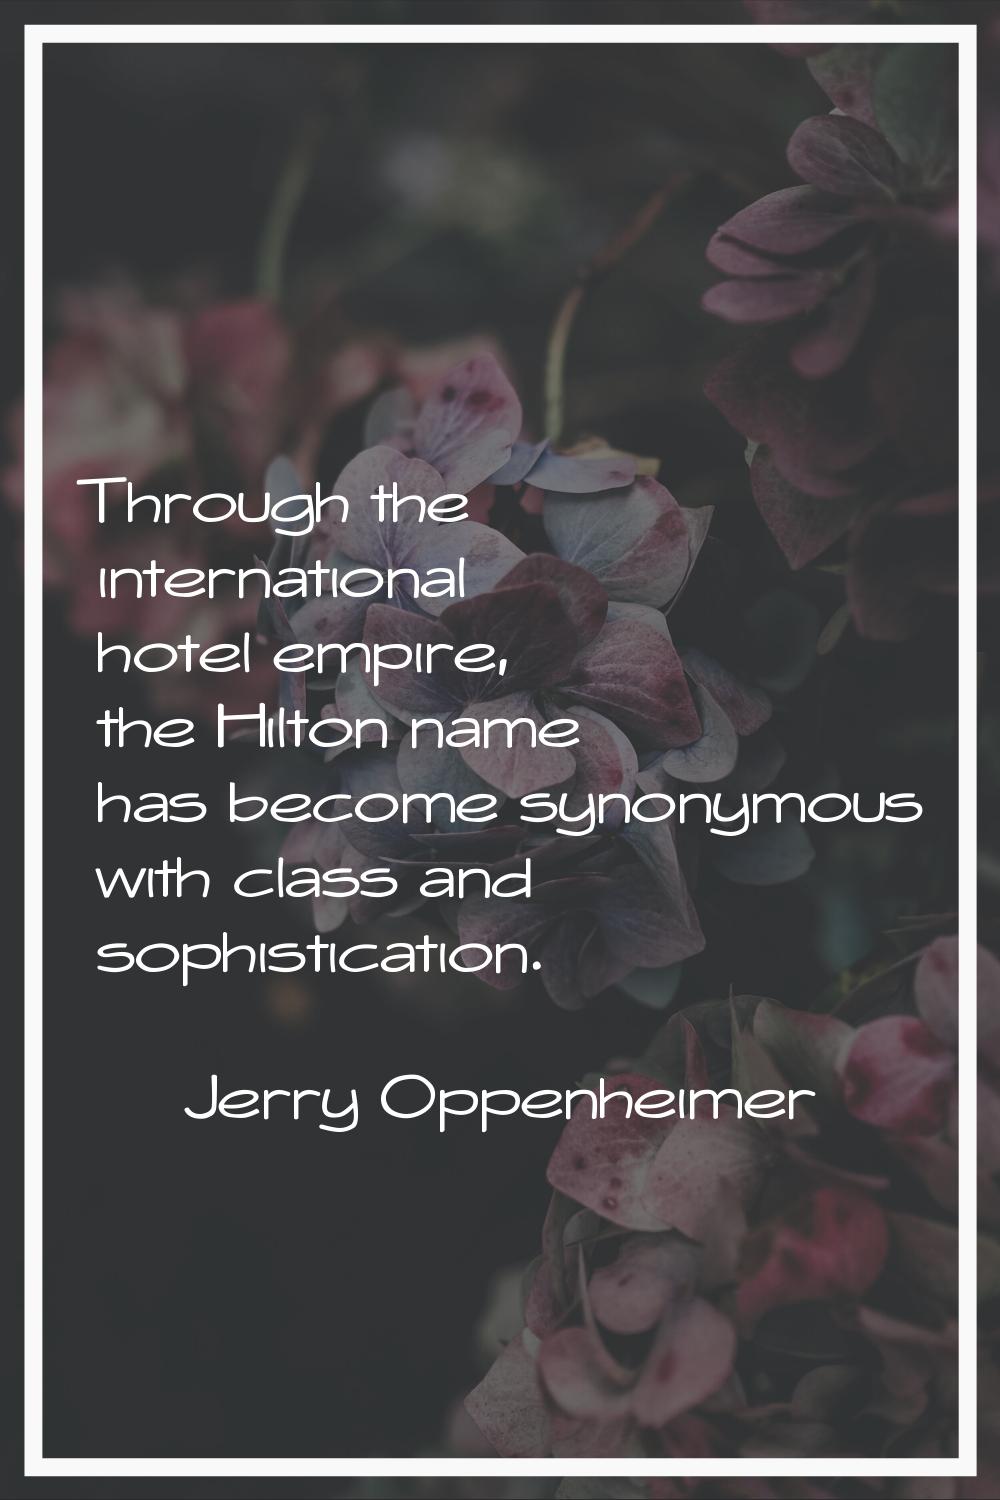 Through the international hotel empire, the Hilton name has become synonymous with class and sophis